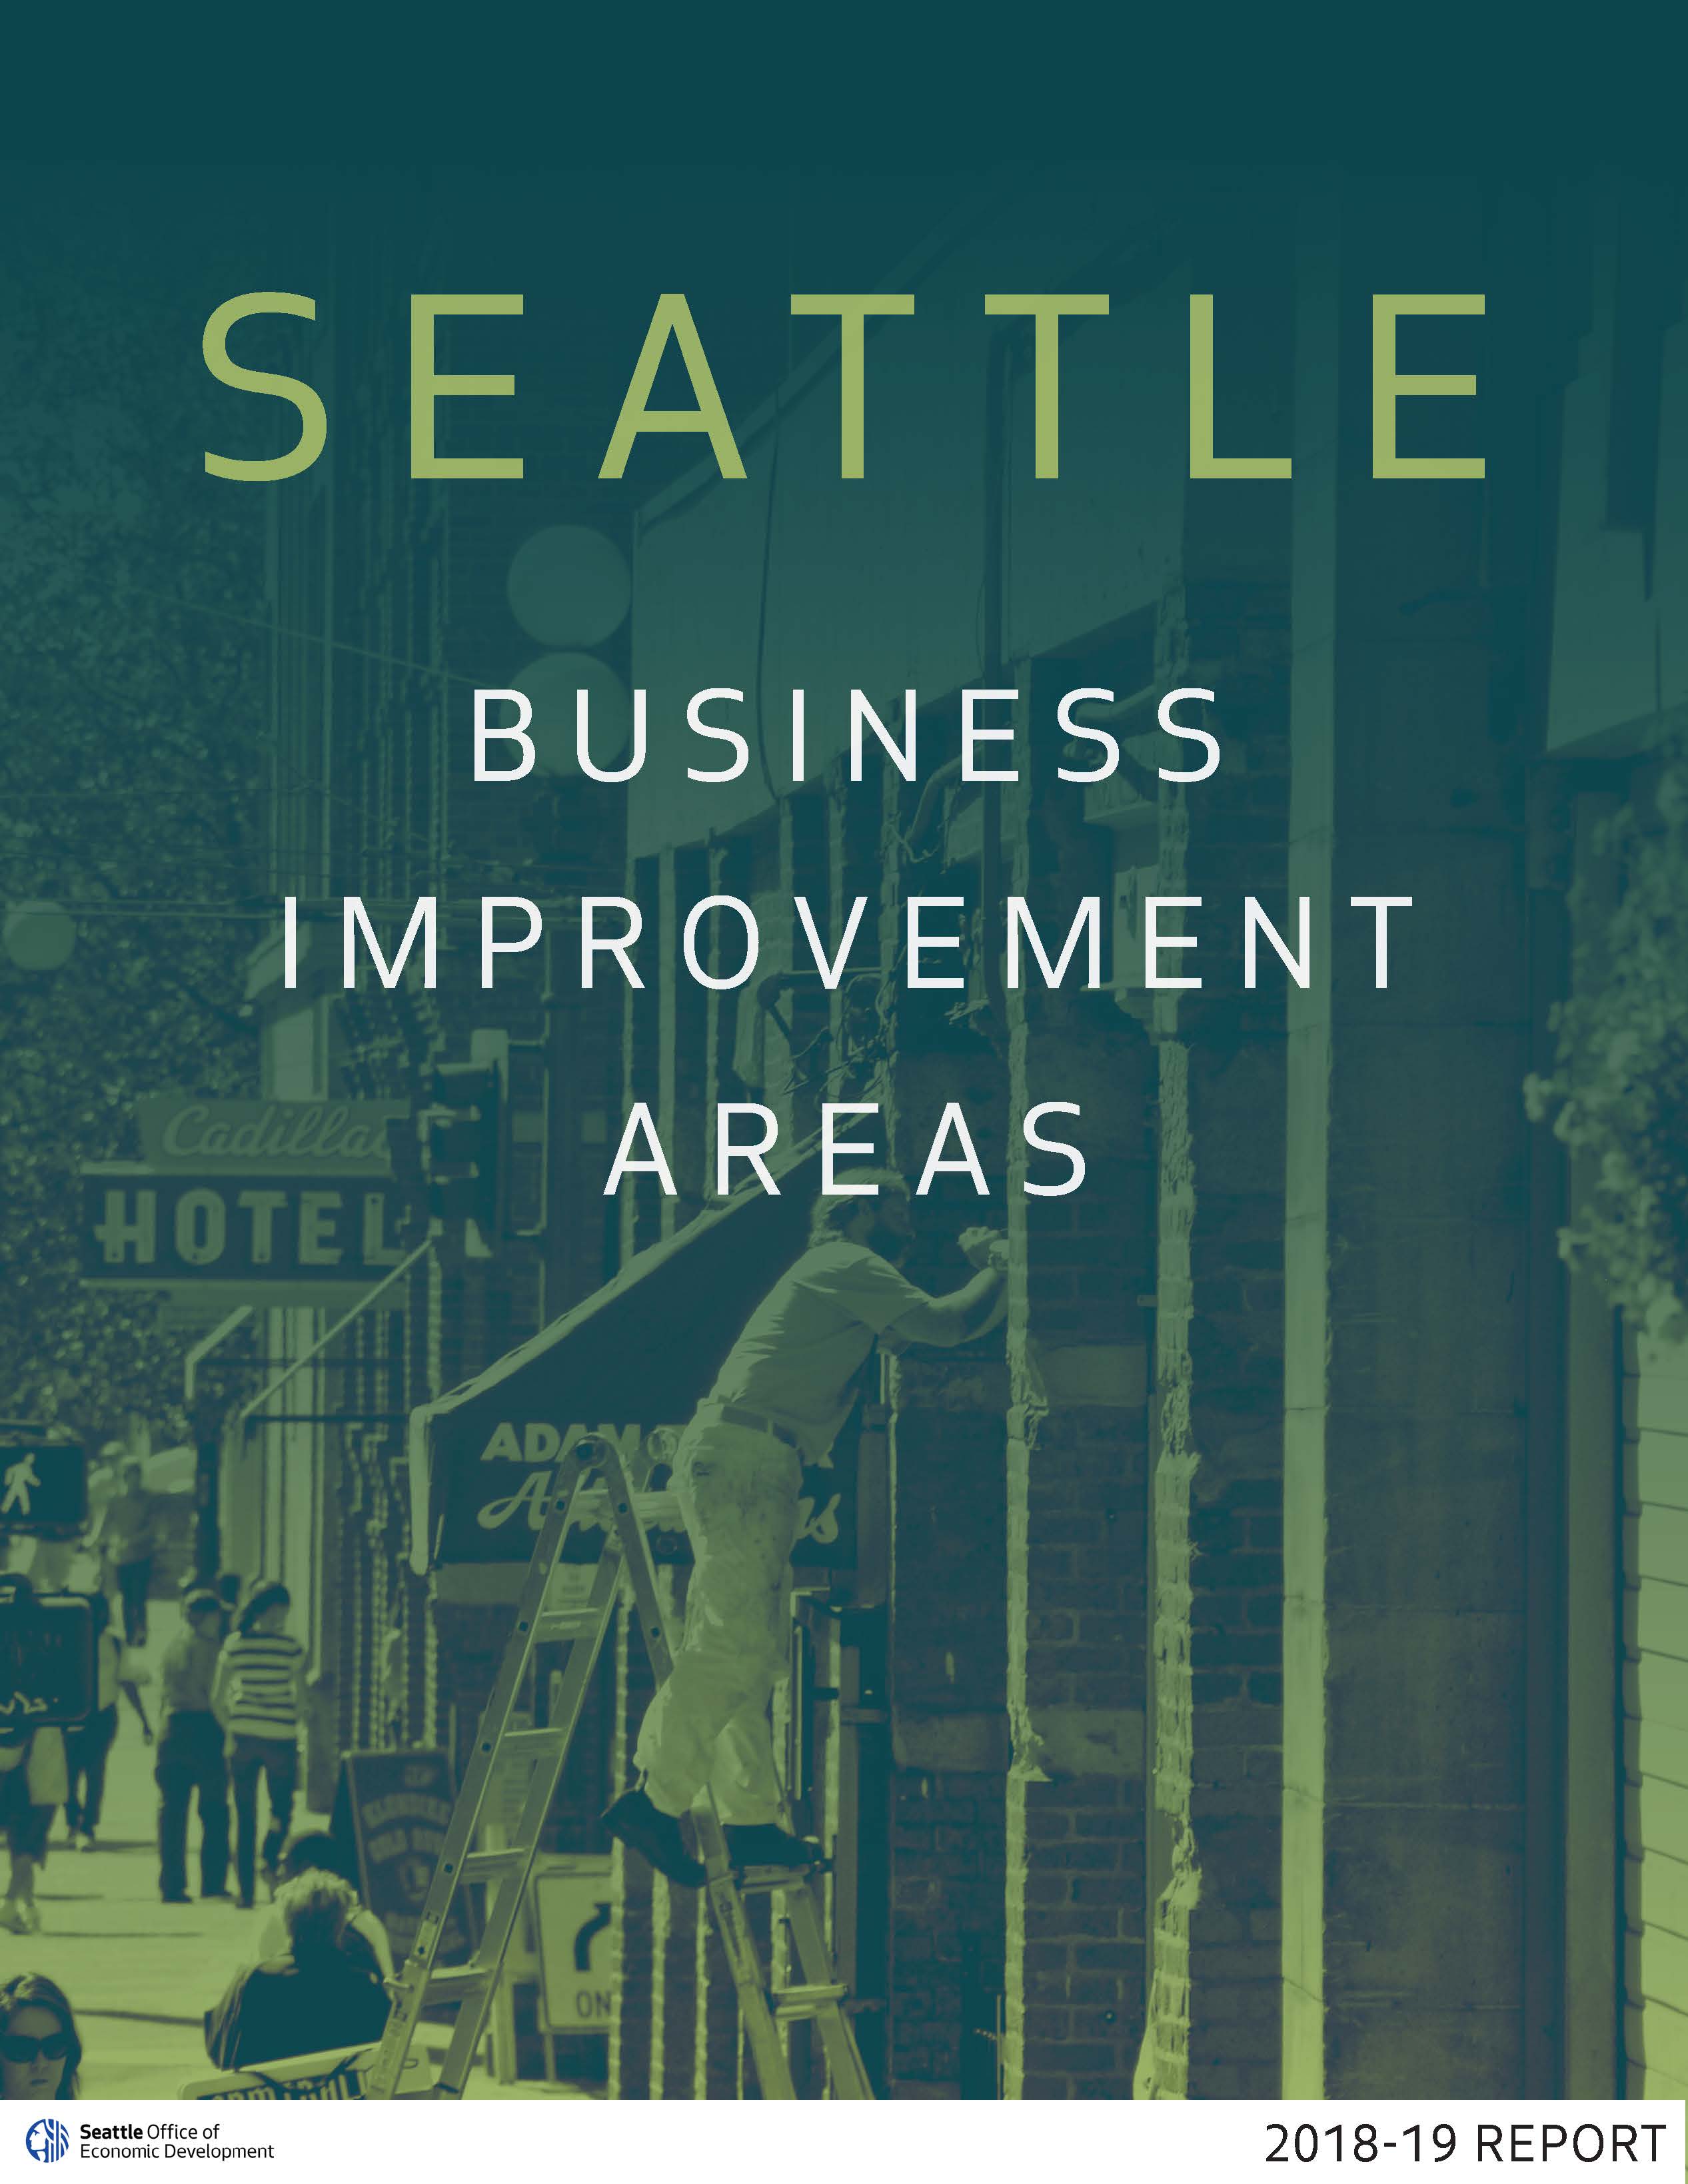 Report cover reads "SEATTLE BUSINESS IMPROVEMENT AREAS"